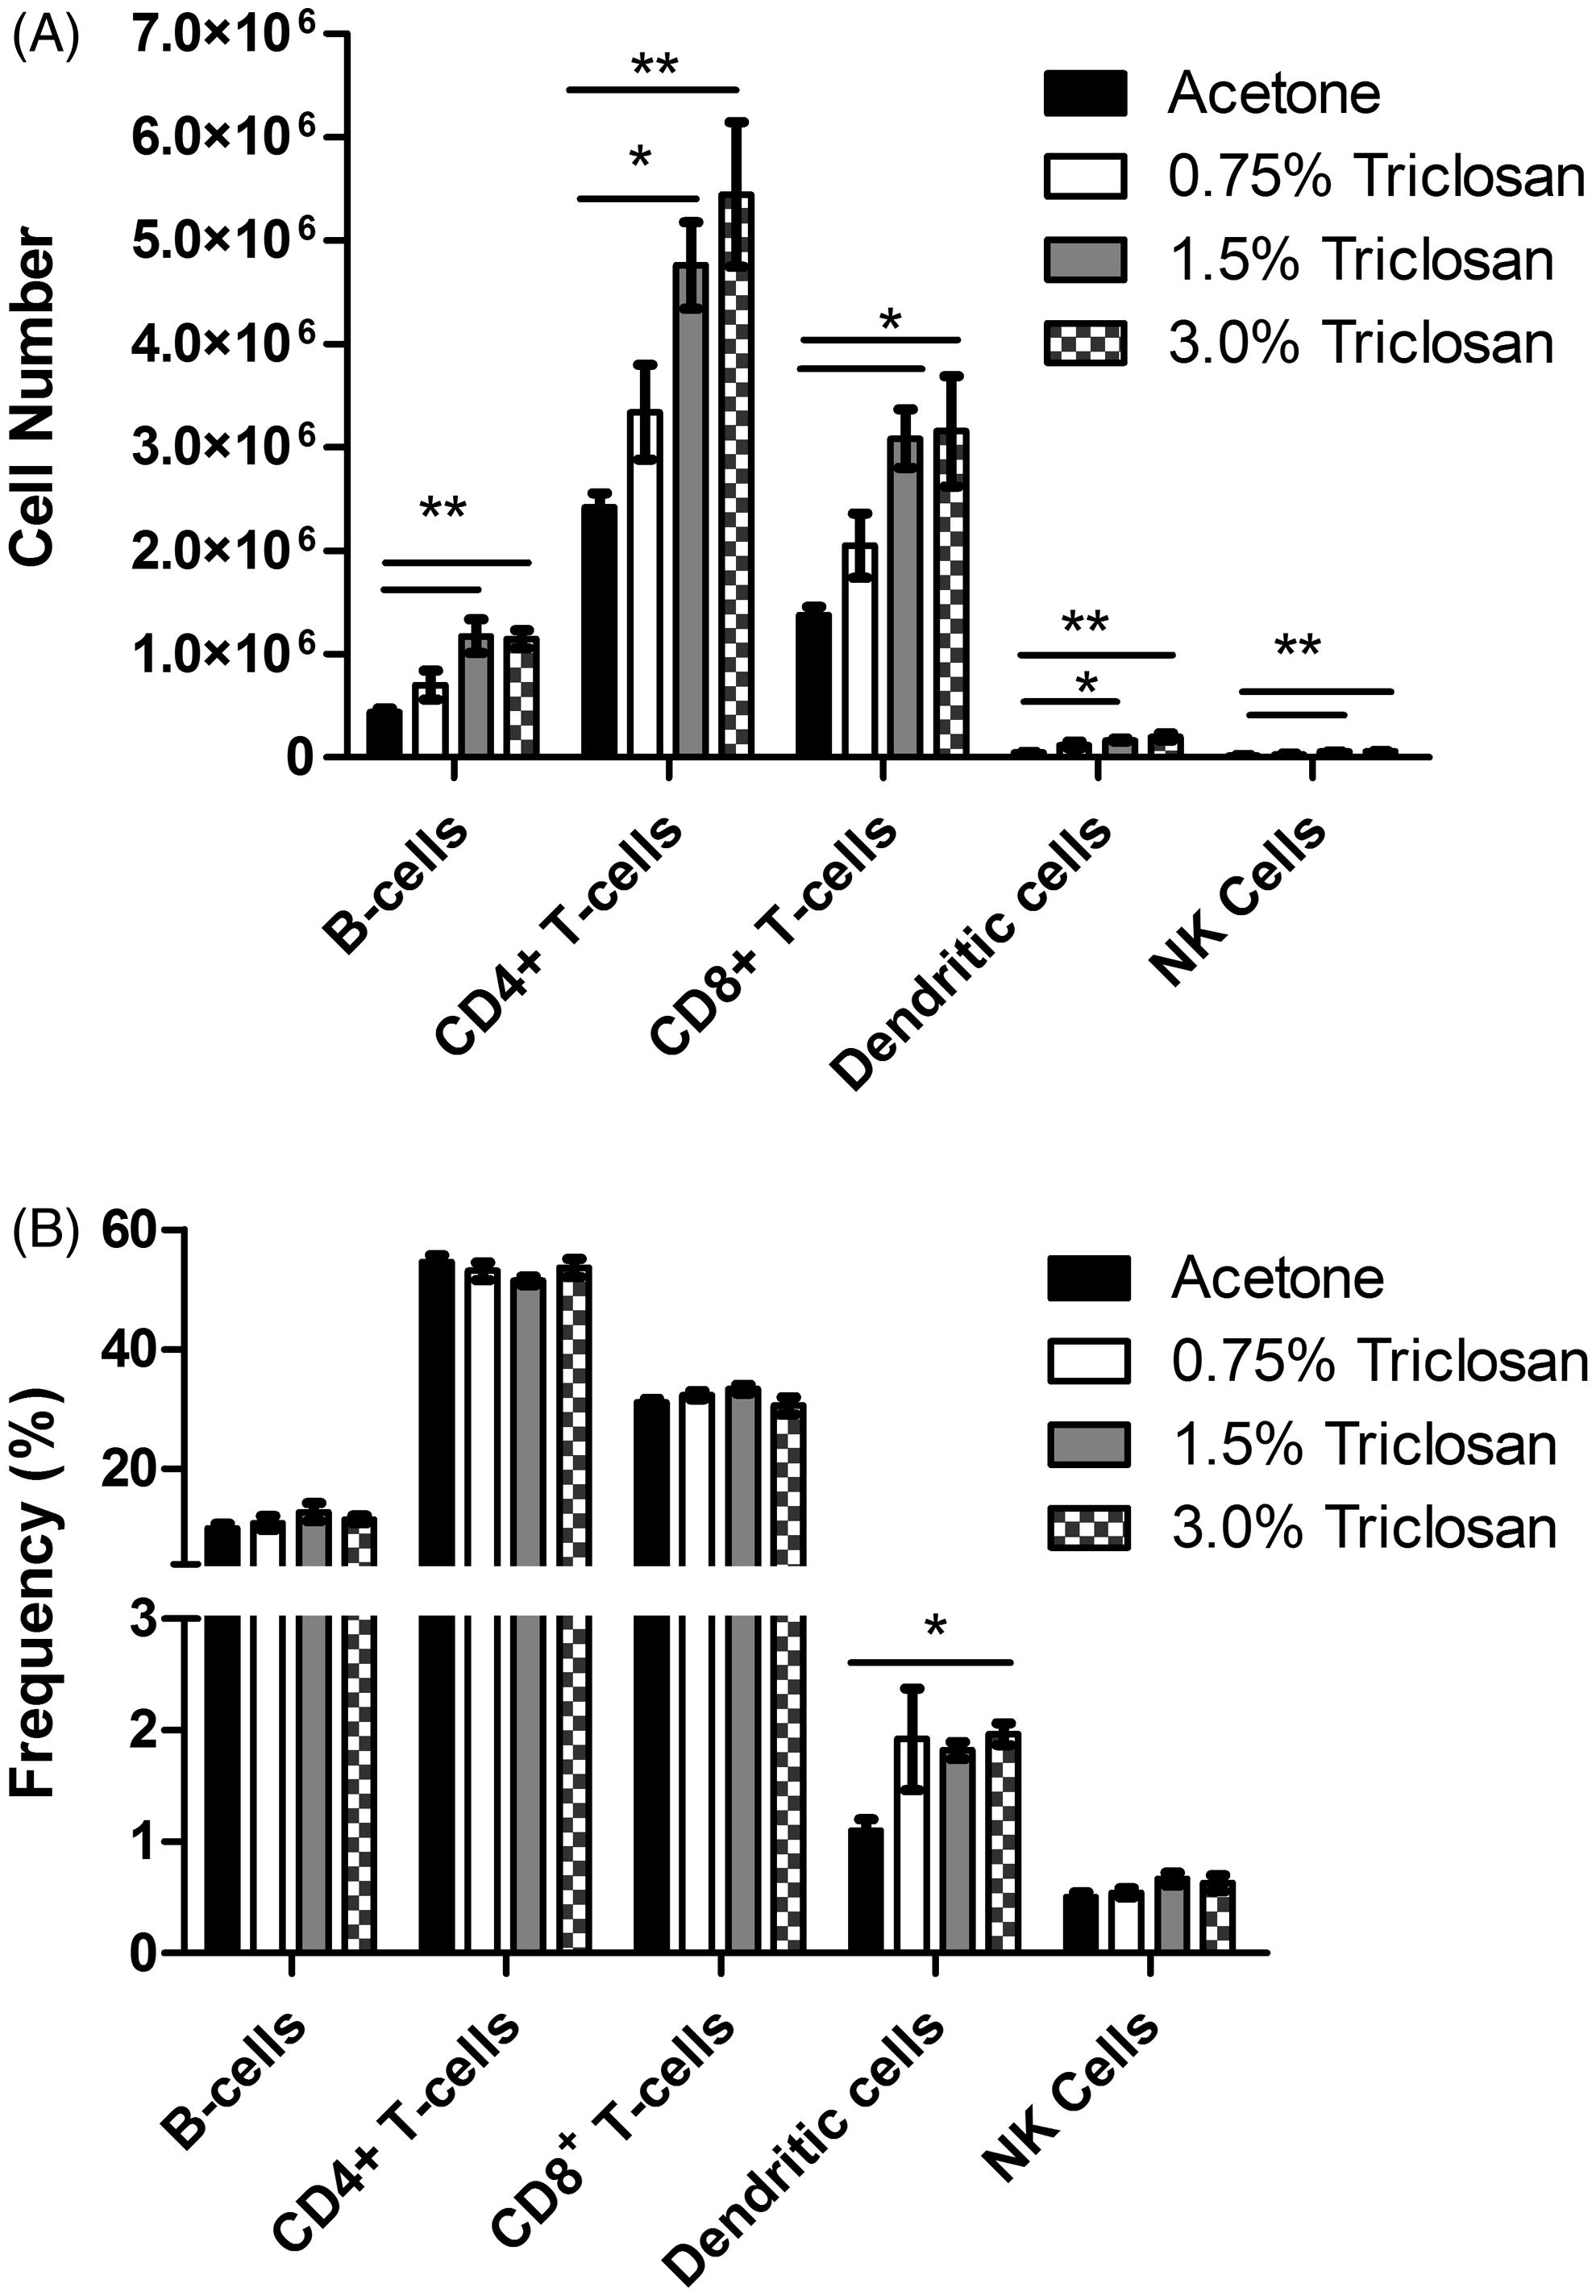 Figure 4. Effects of dermal exposure to triclosan for 28 days on leukocyte populations. Effects of dermal exposure to triclosan for 28 days on (A) total cell number and (B) frequency of lymphocyte subpopulations in female B6C3F1 mice. Numbers of B-cells, CD4+ and CD8+ T-cells, dendritic cells and NK cells were enumerated using flow cytometry. Values shown are means (±SE) for each group. Levels of statistical significance are denoted *p < 0.05 and **p < 0.01 as compared to acetone vehicle.